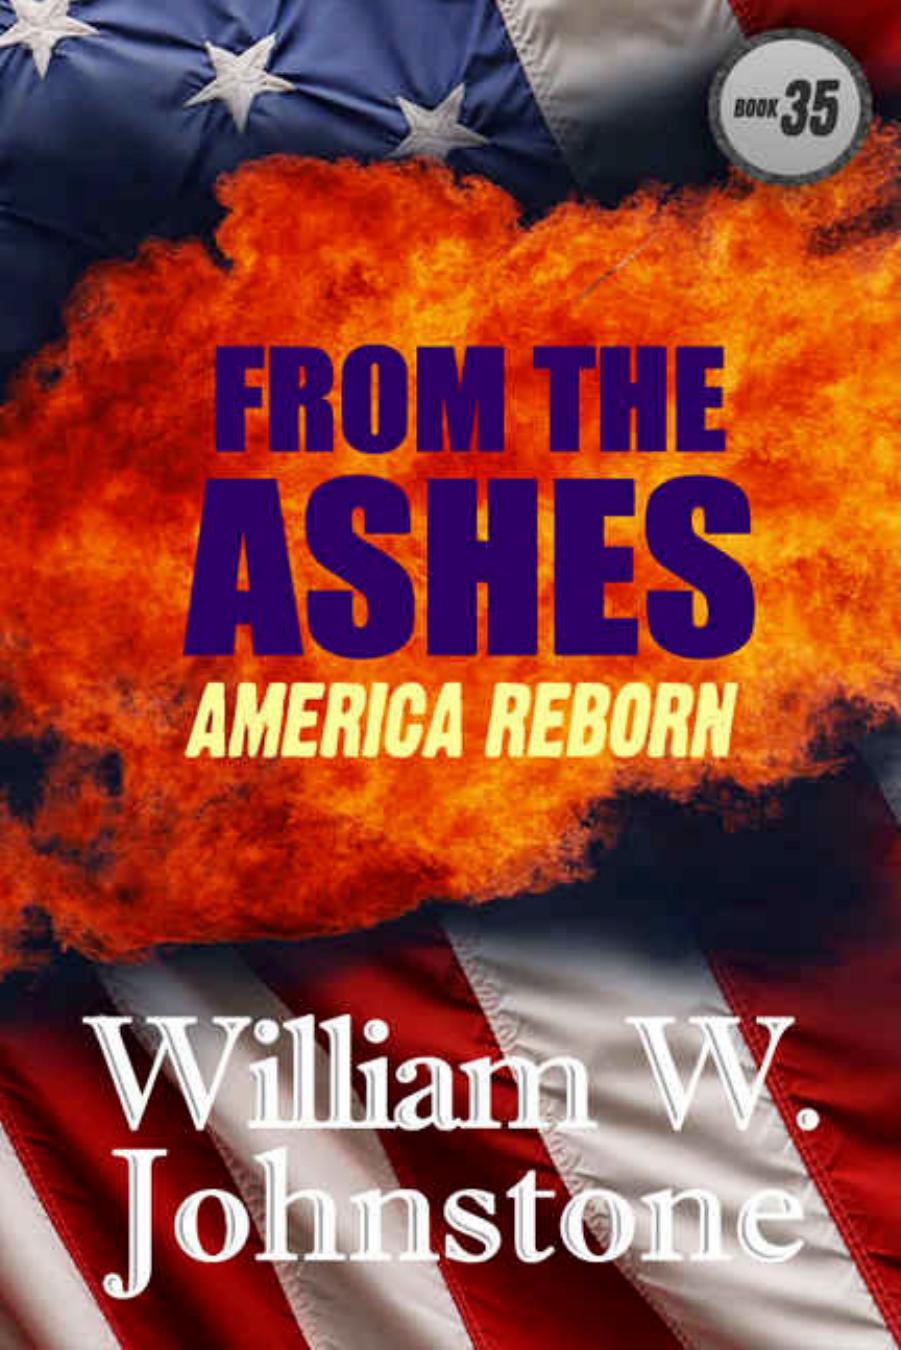 From the Ashes: America Reborn [Ashes: 35] by William W. Johnstone